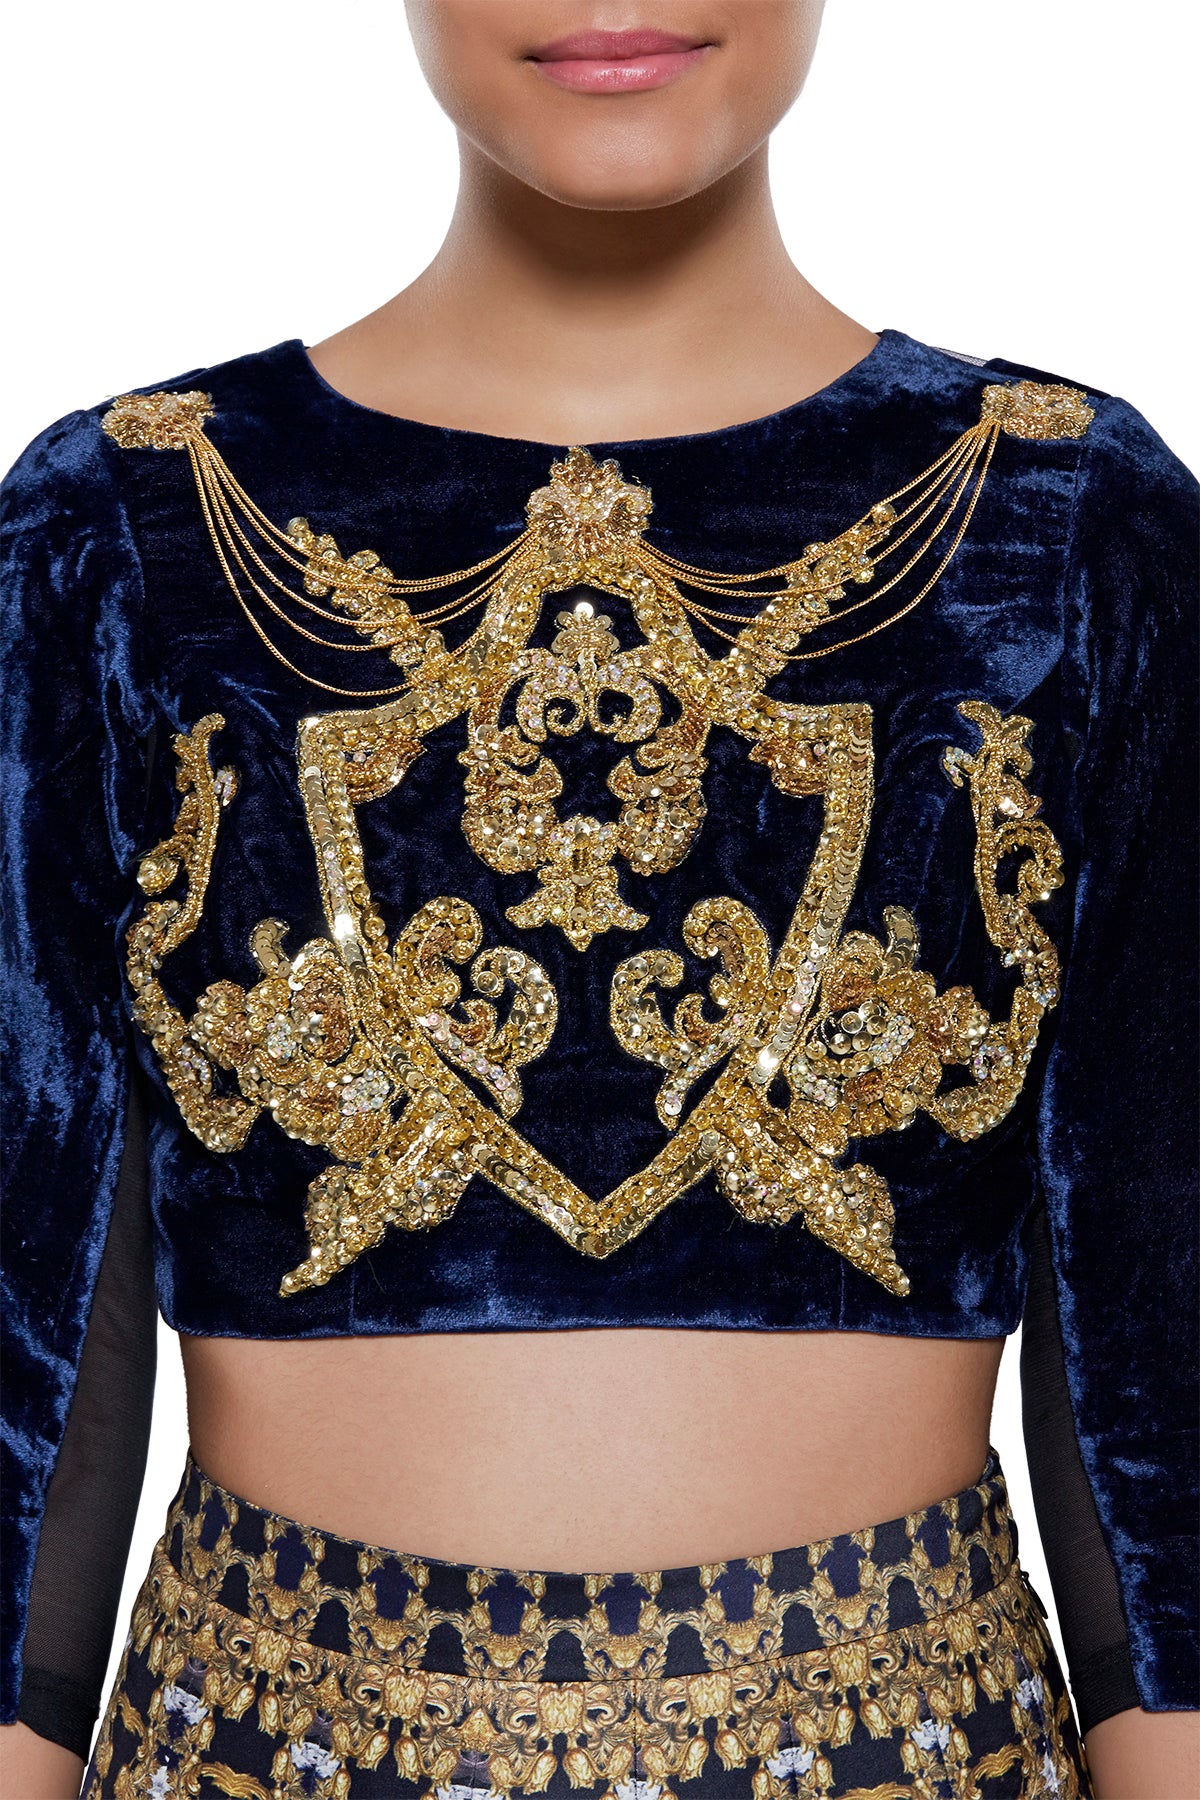 Aggregate more than 126 velvet crop top and lehenga latest